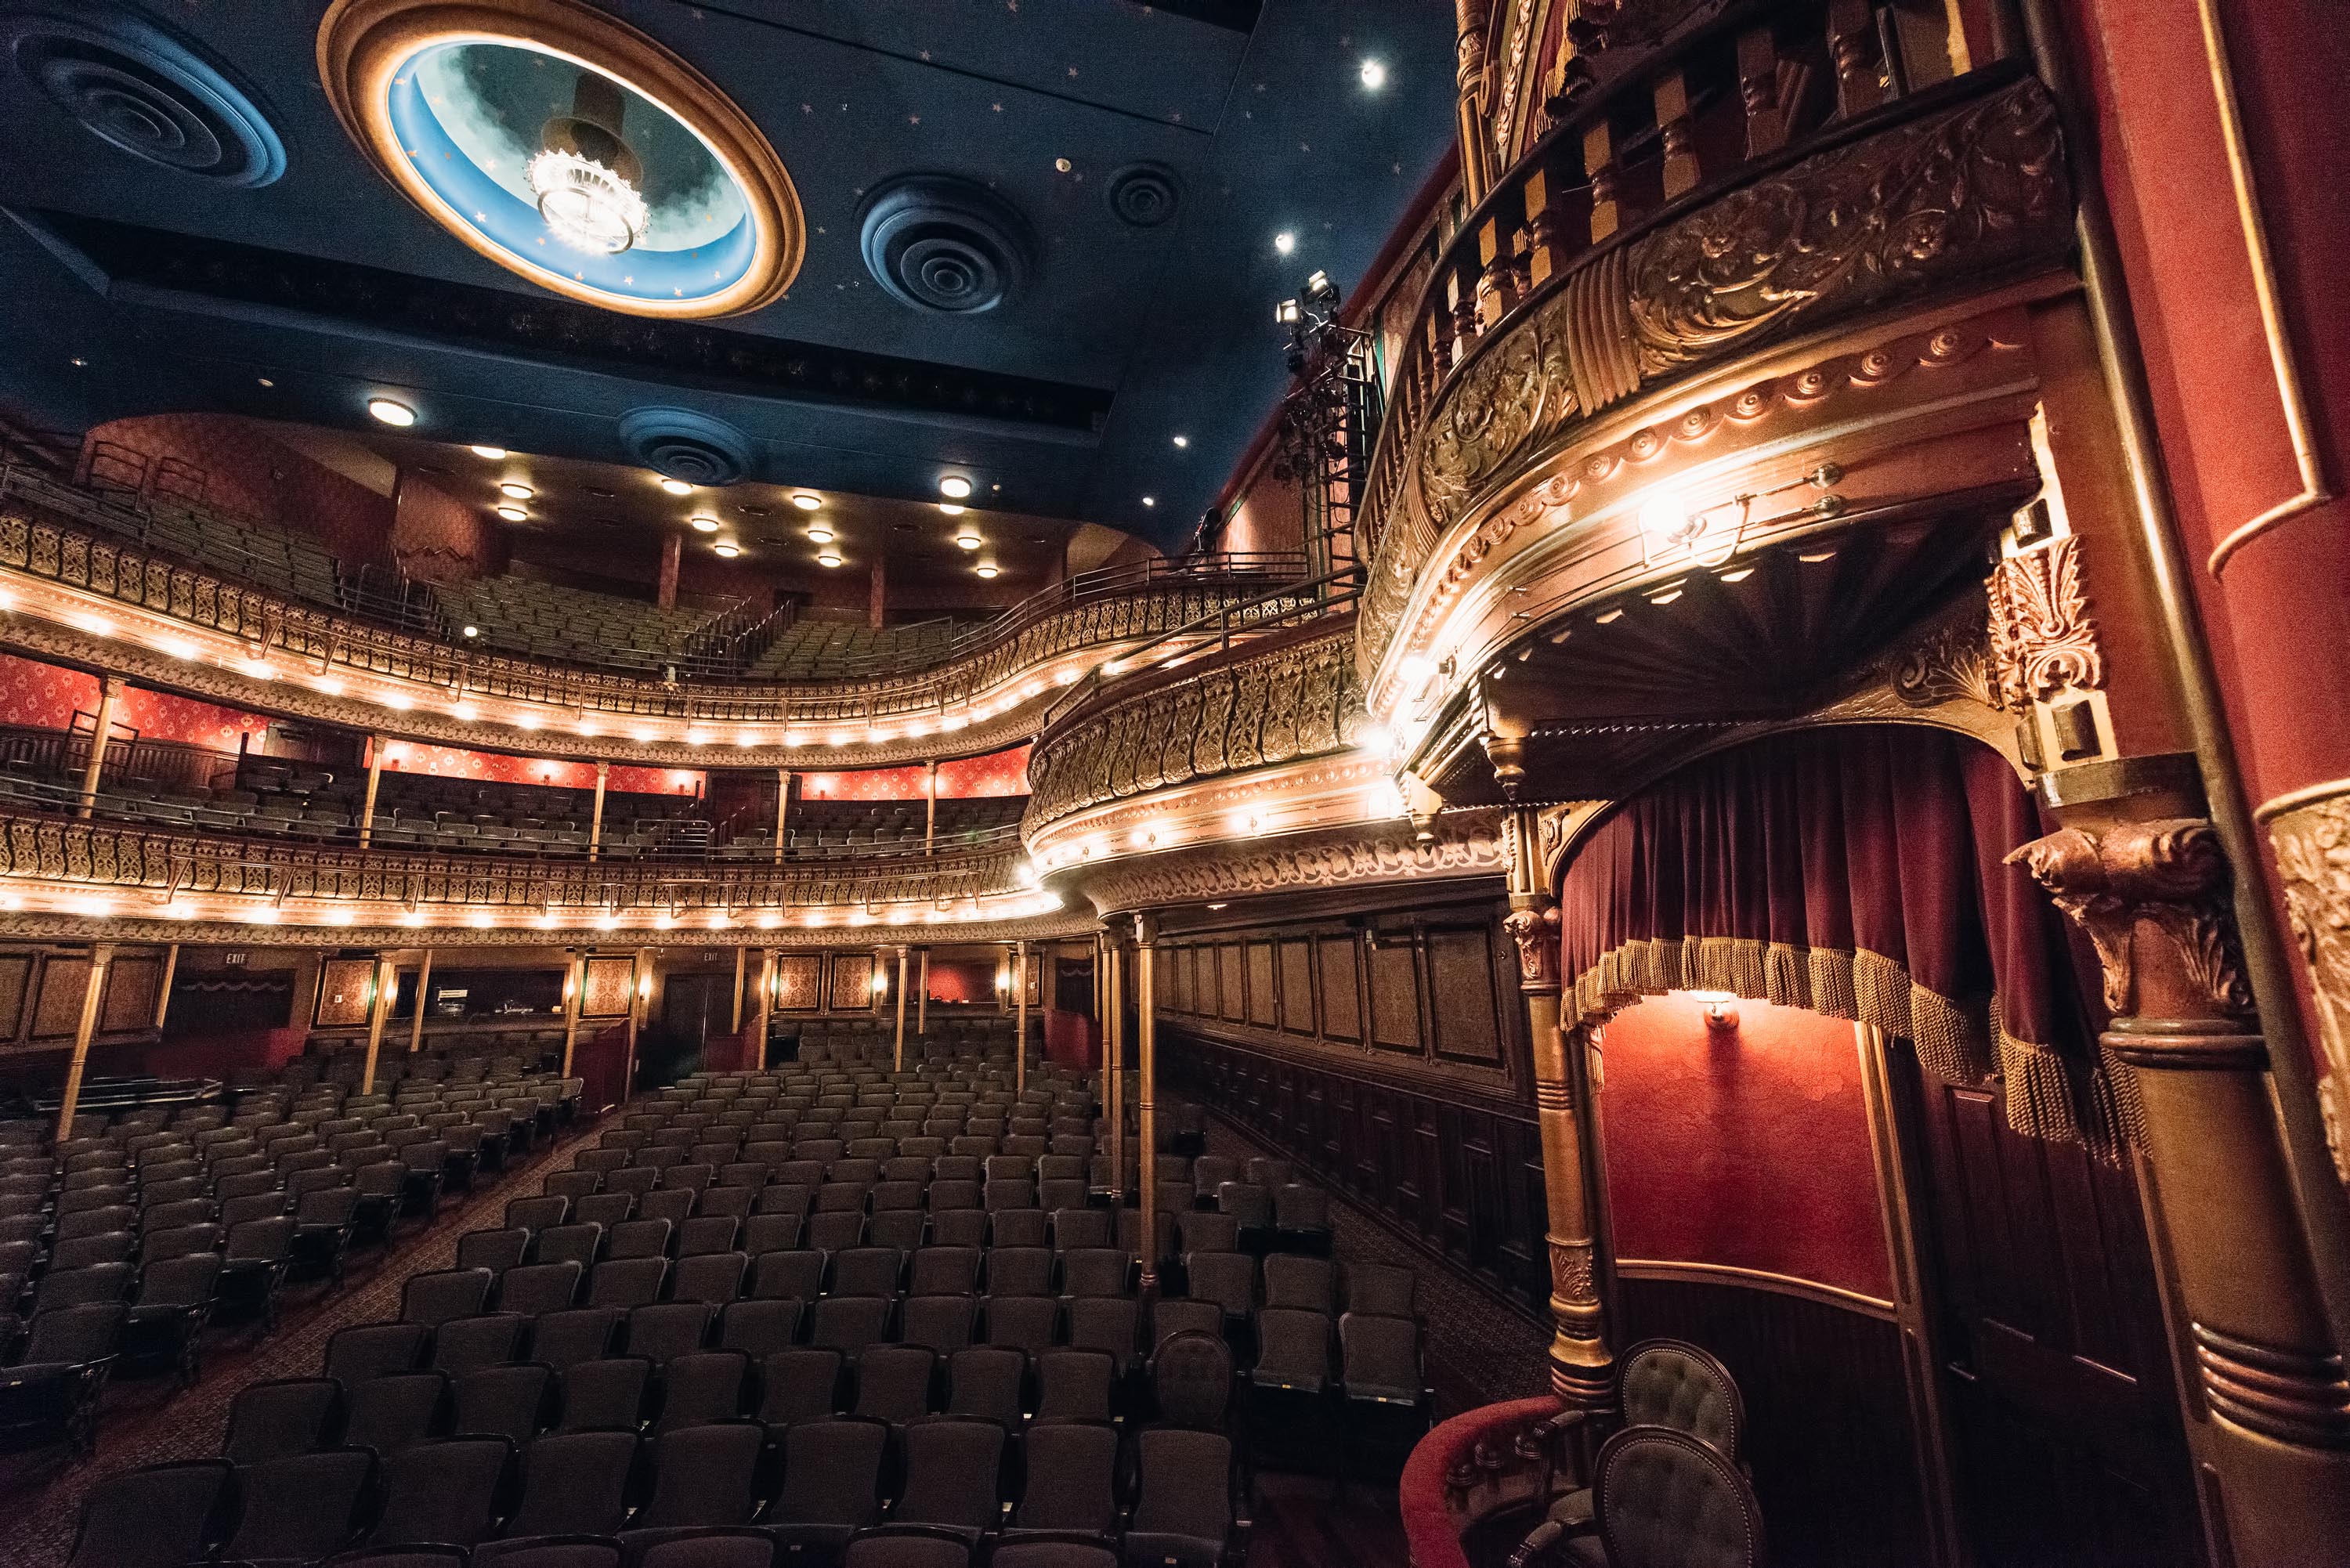 MSU's Riley Center is featured this month in Architectural Digest's online list of "14 Historic American Theatres."